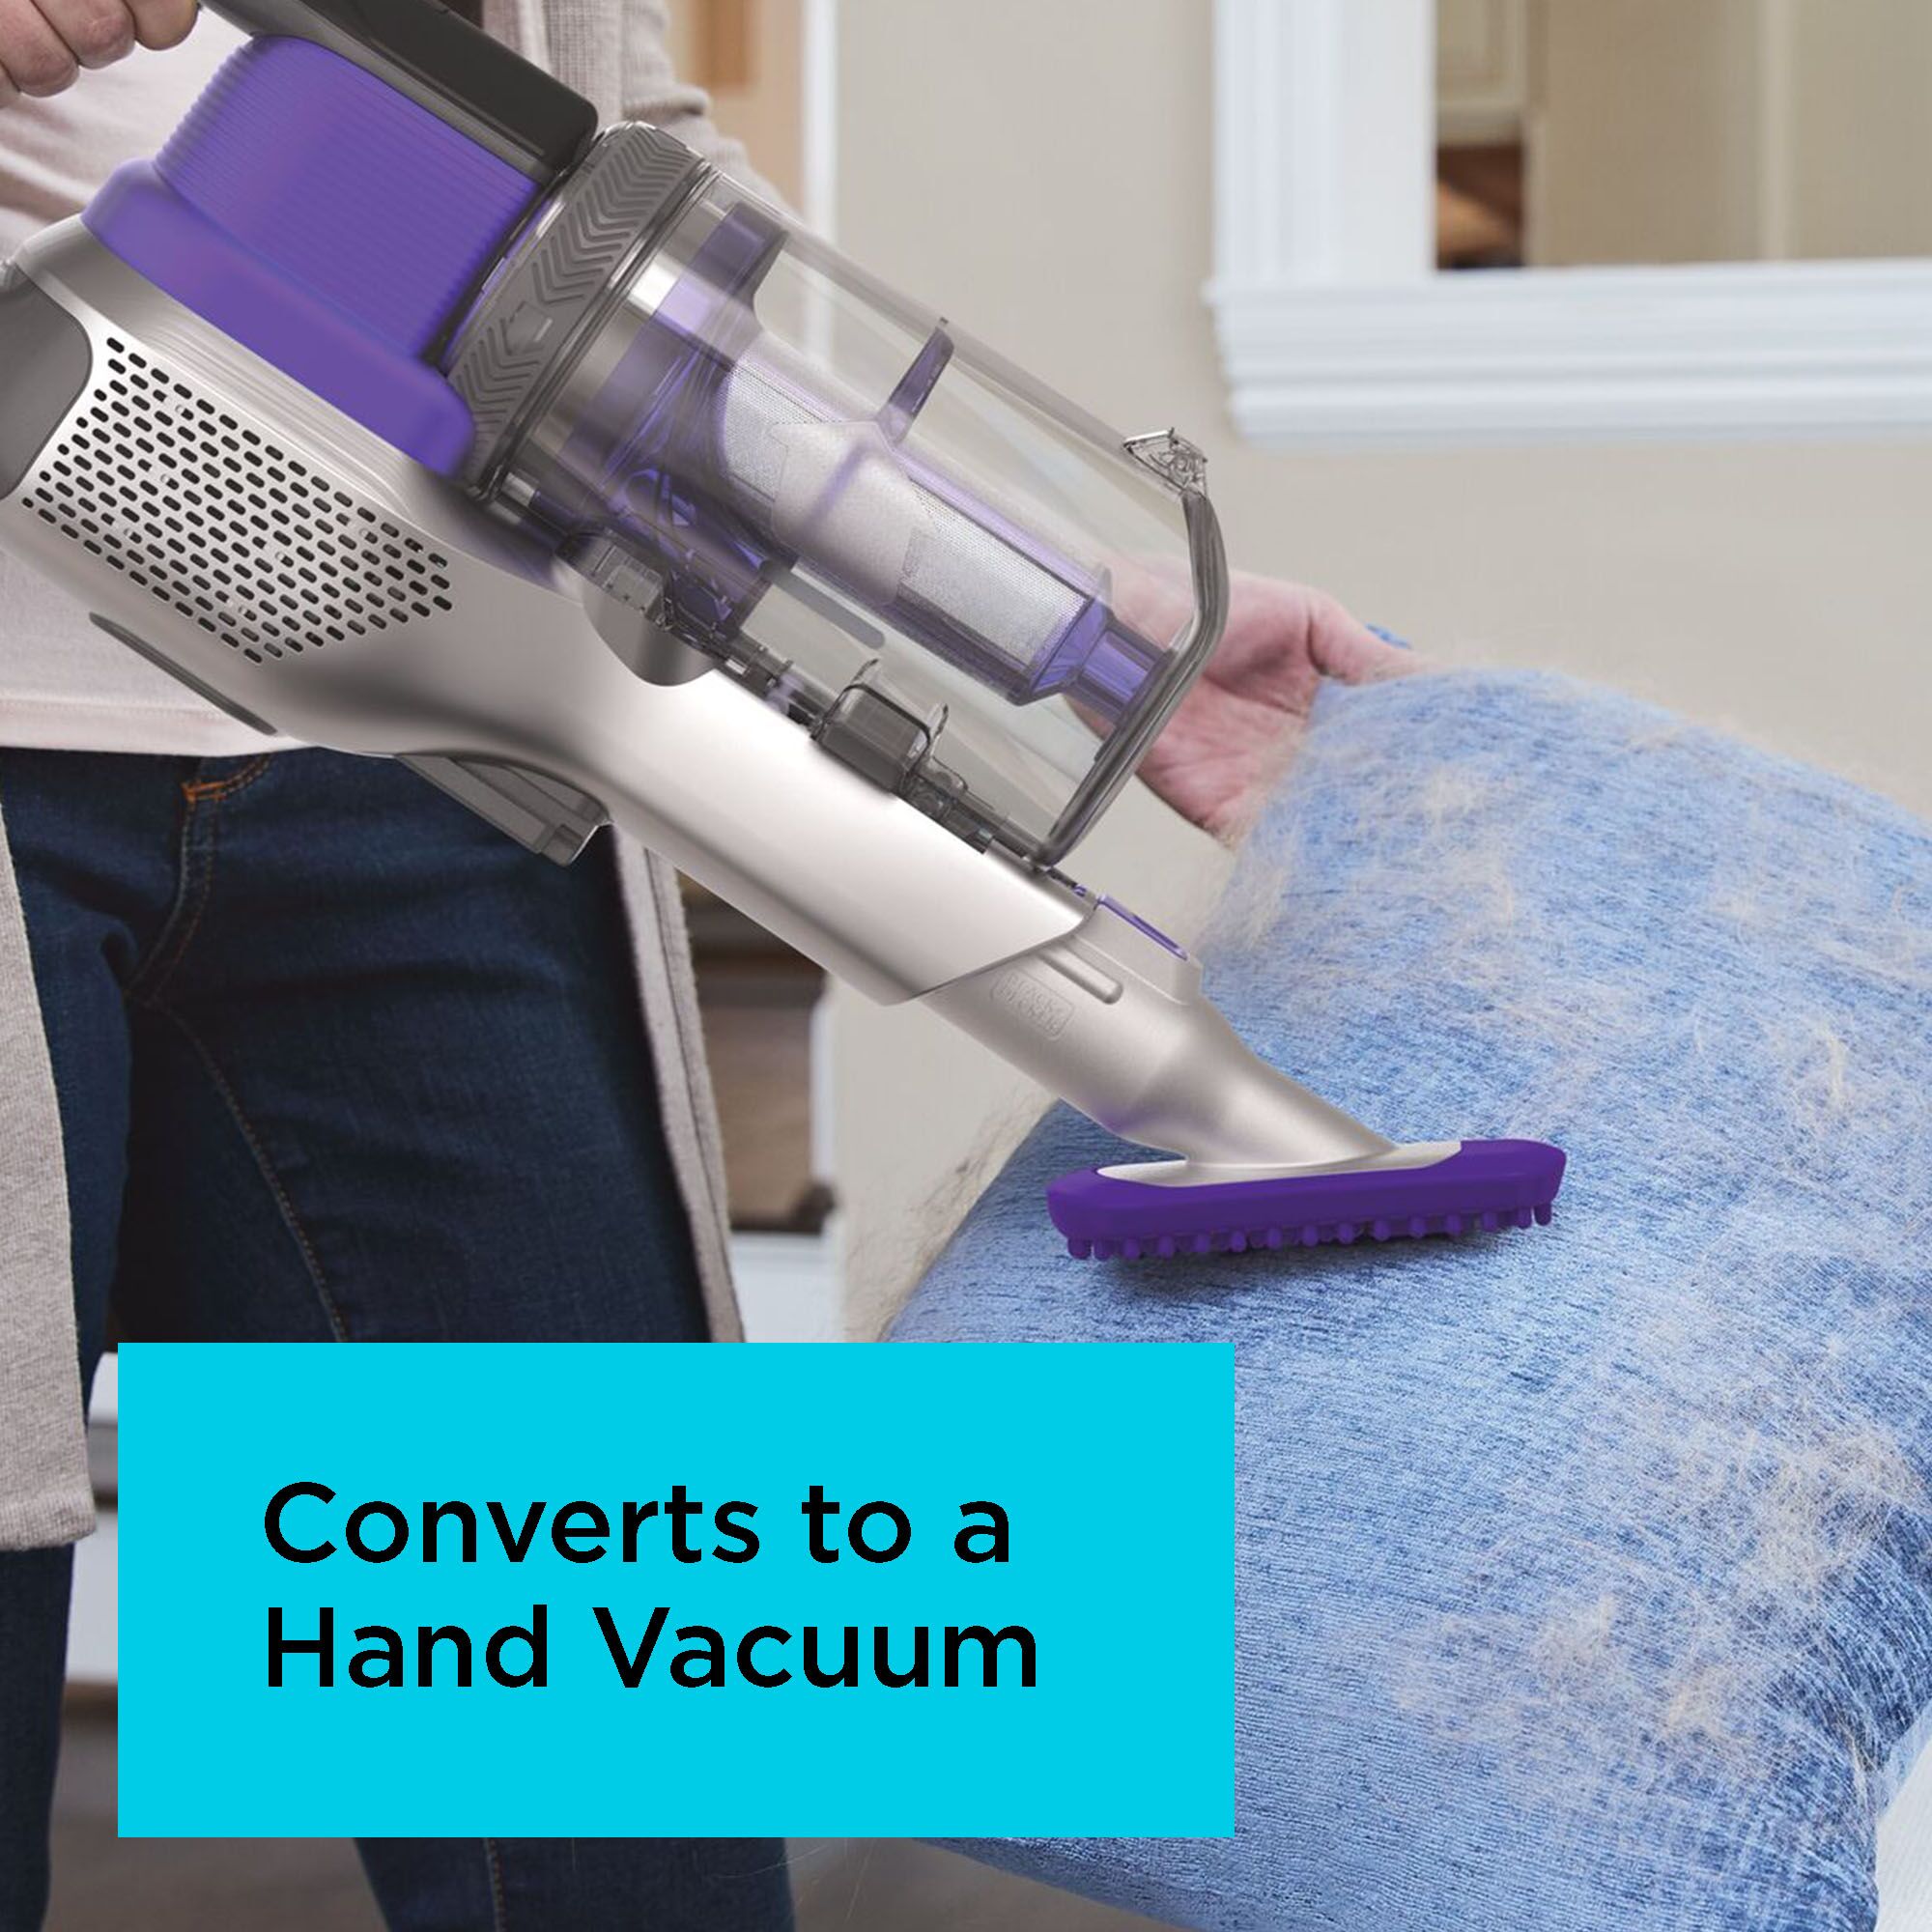  BLACK+DECKER Powerseries Extreme Cordless Stick Vacuum Cleaner  for Pets, Purple (BSV2020P) : Tools & Home Improvement